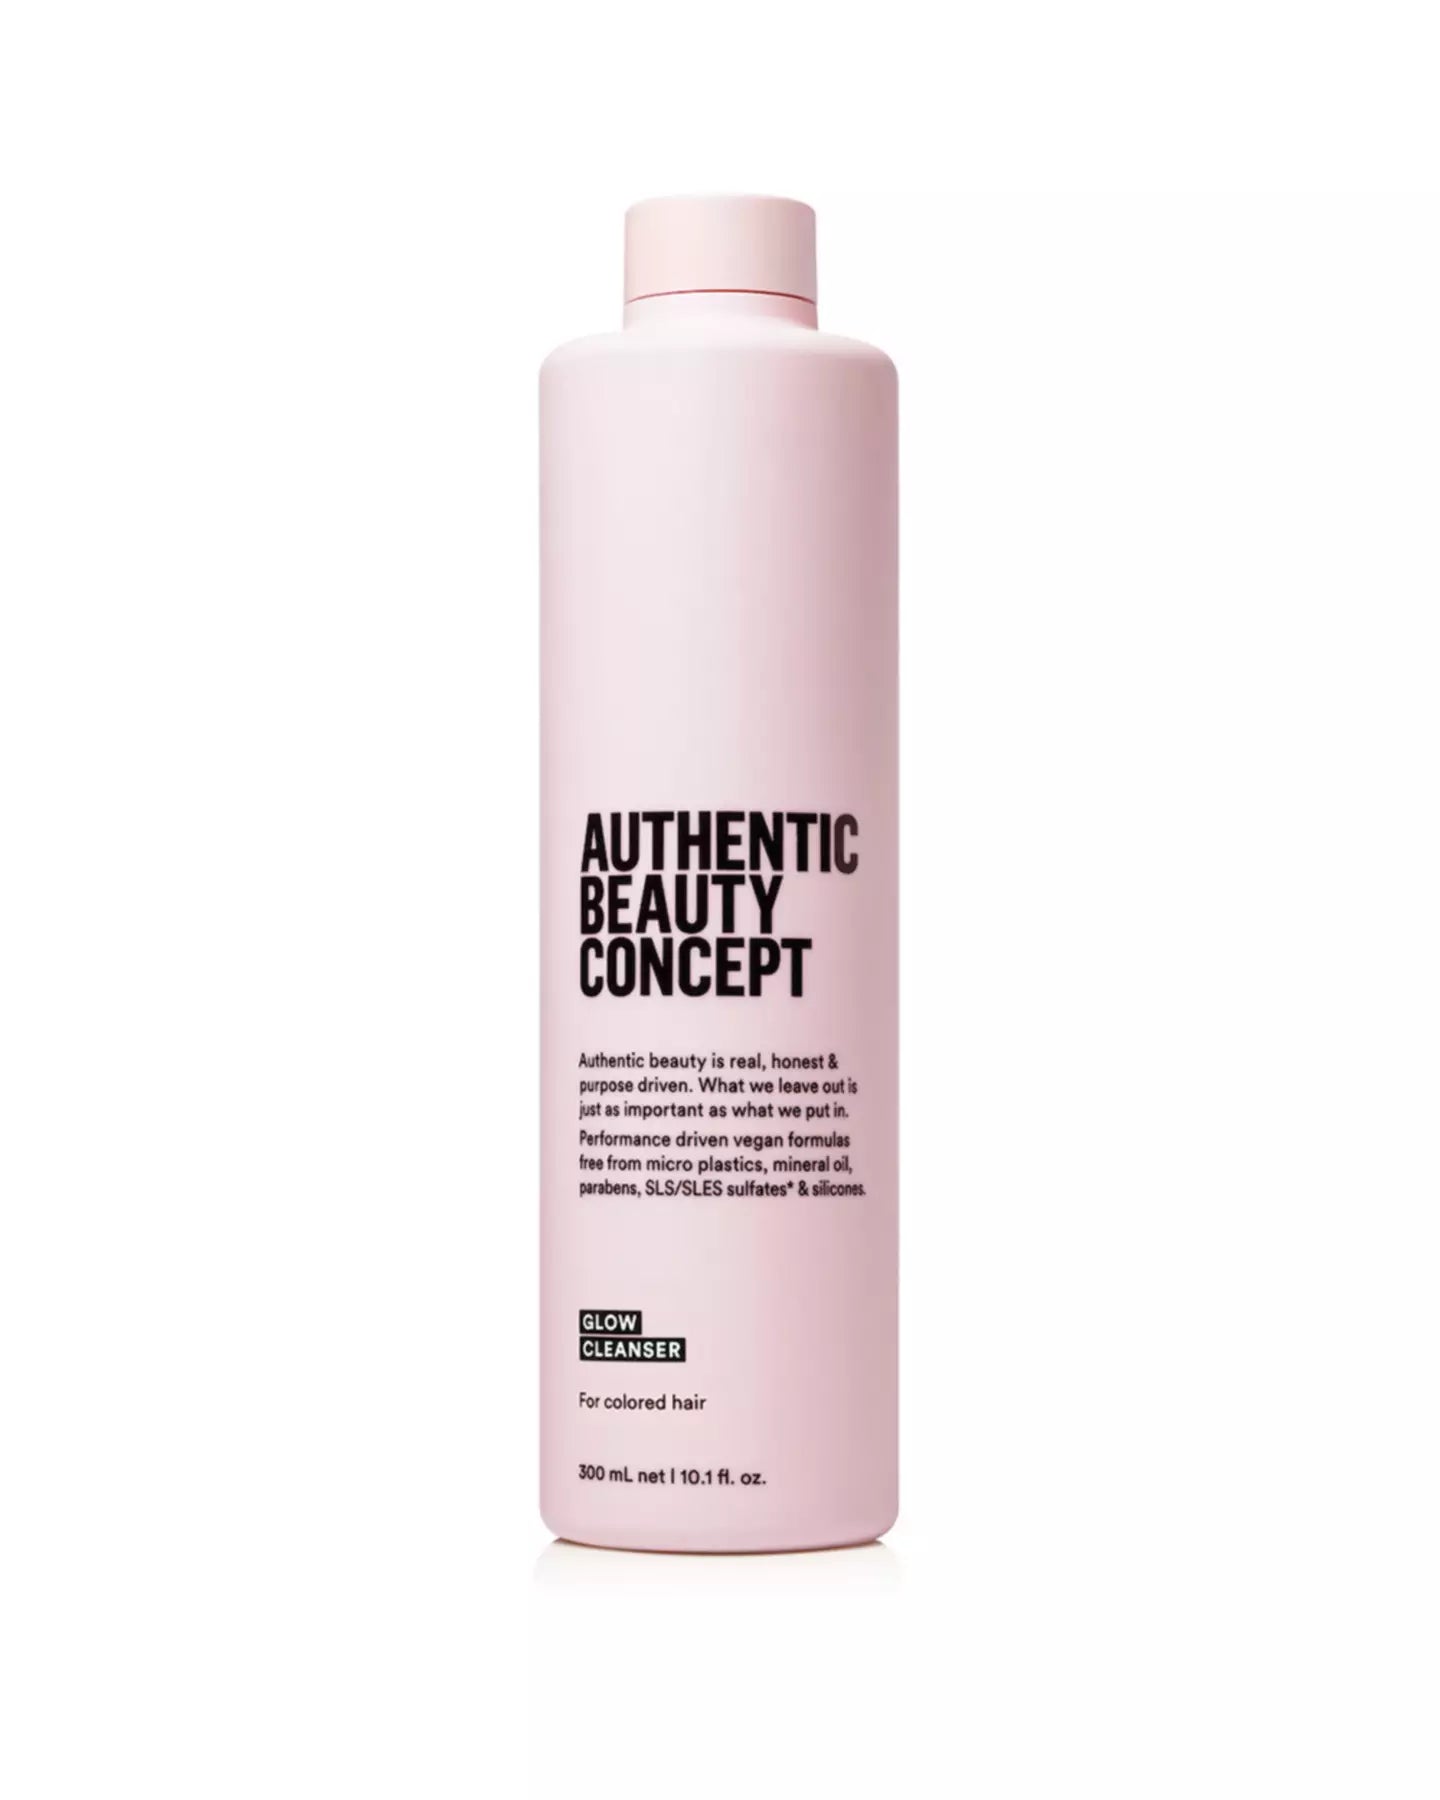 Authentic Beauty Concept Glow cleanser